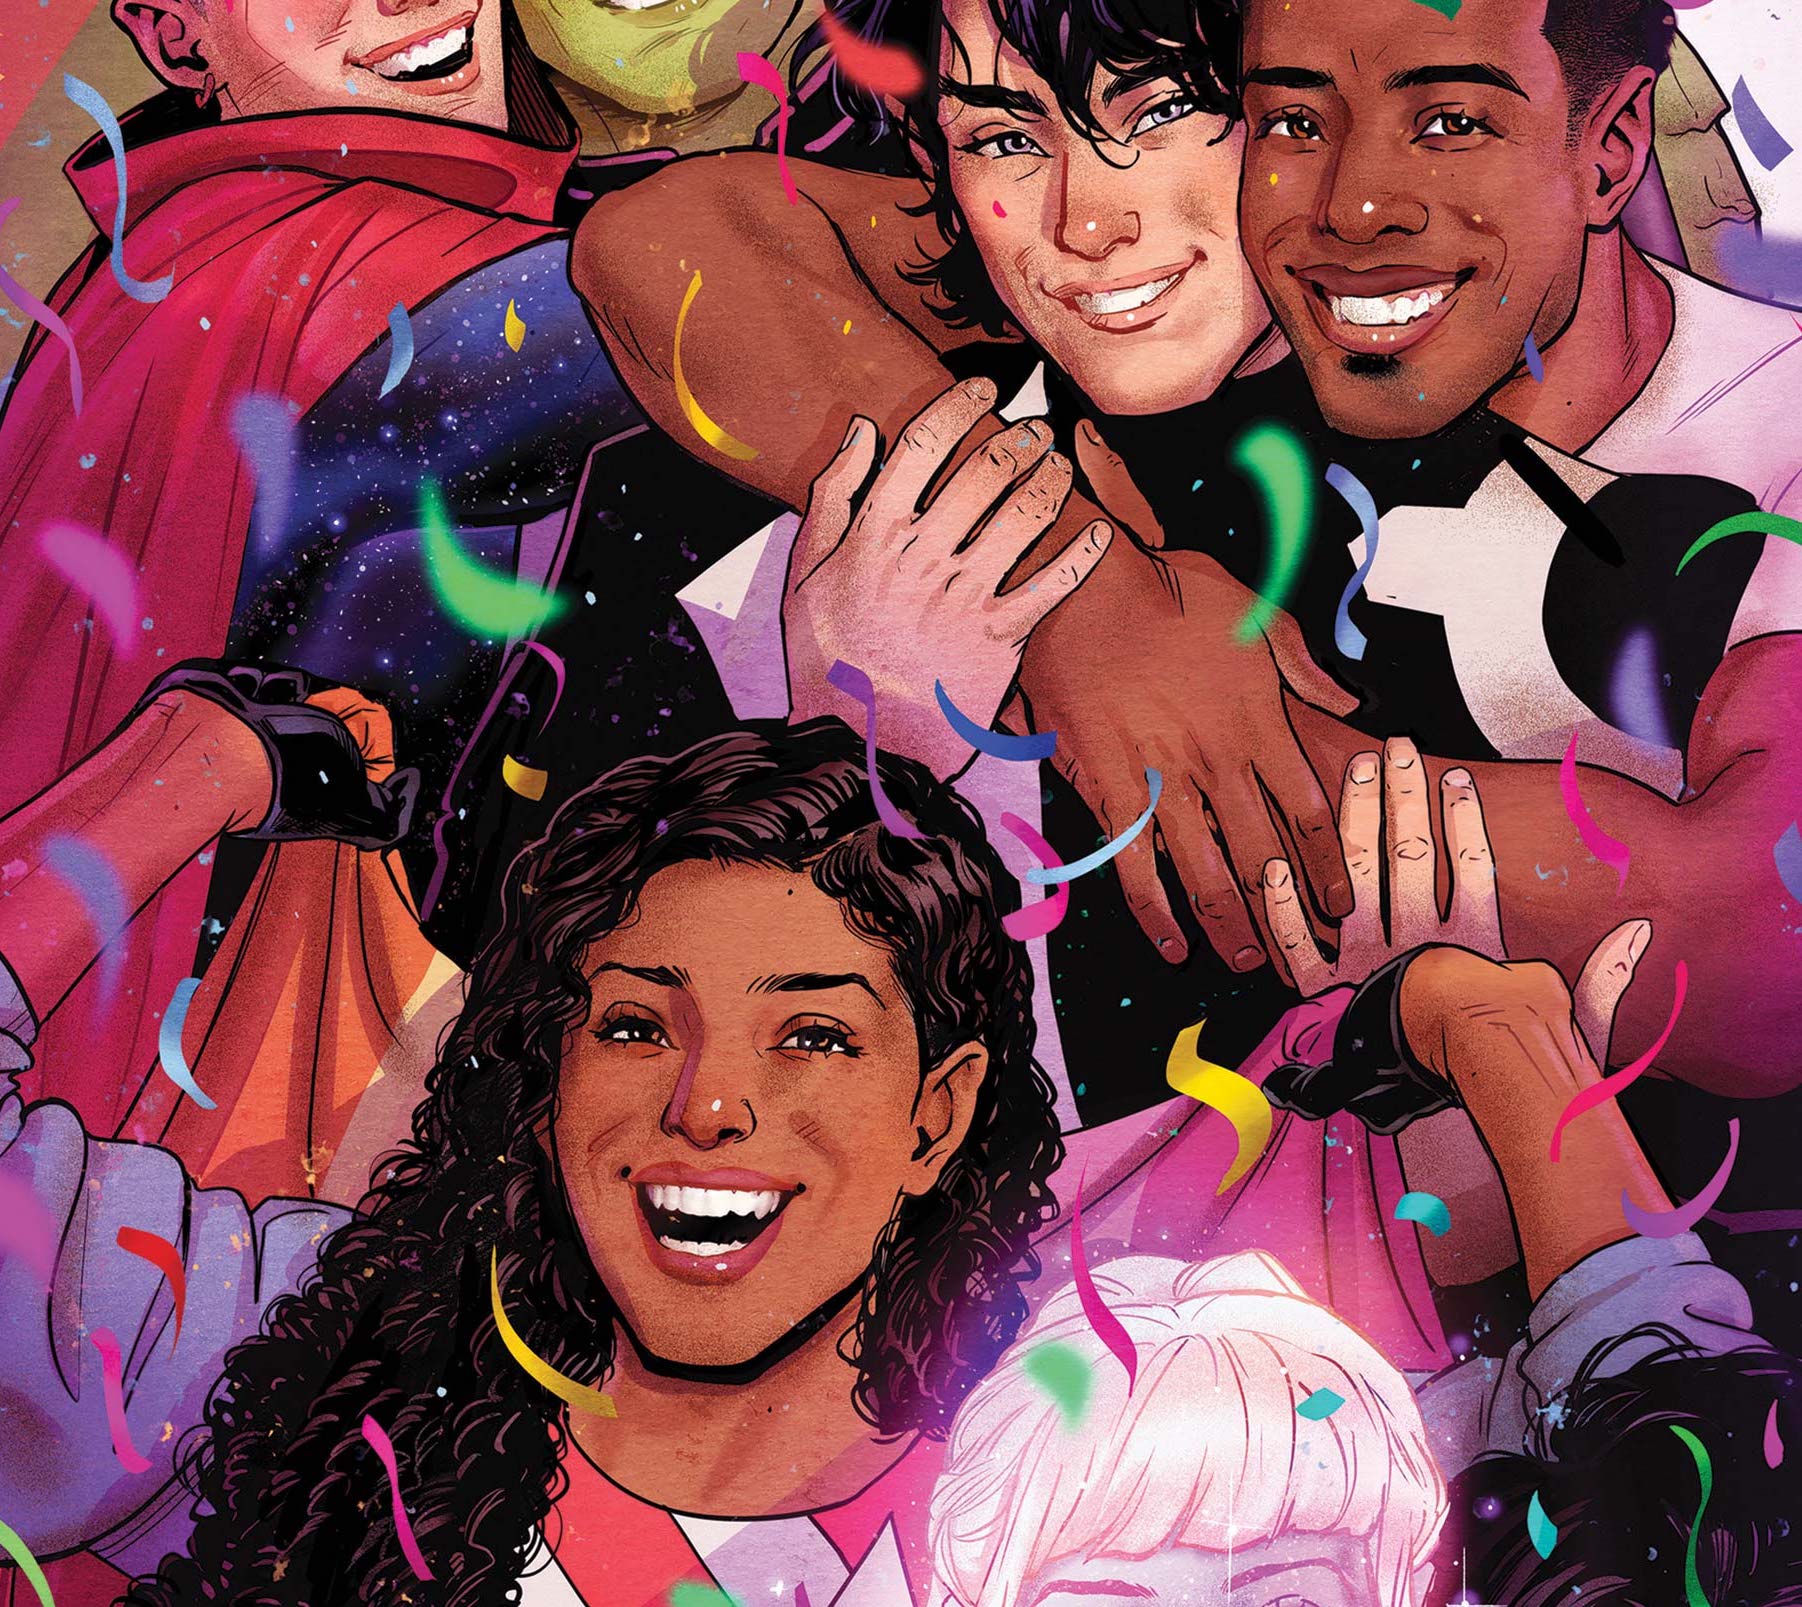 Reflecting on representation and 'Marvel's Voices: Pride' #1